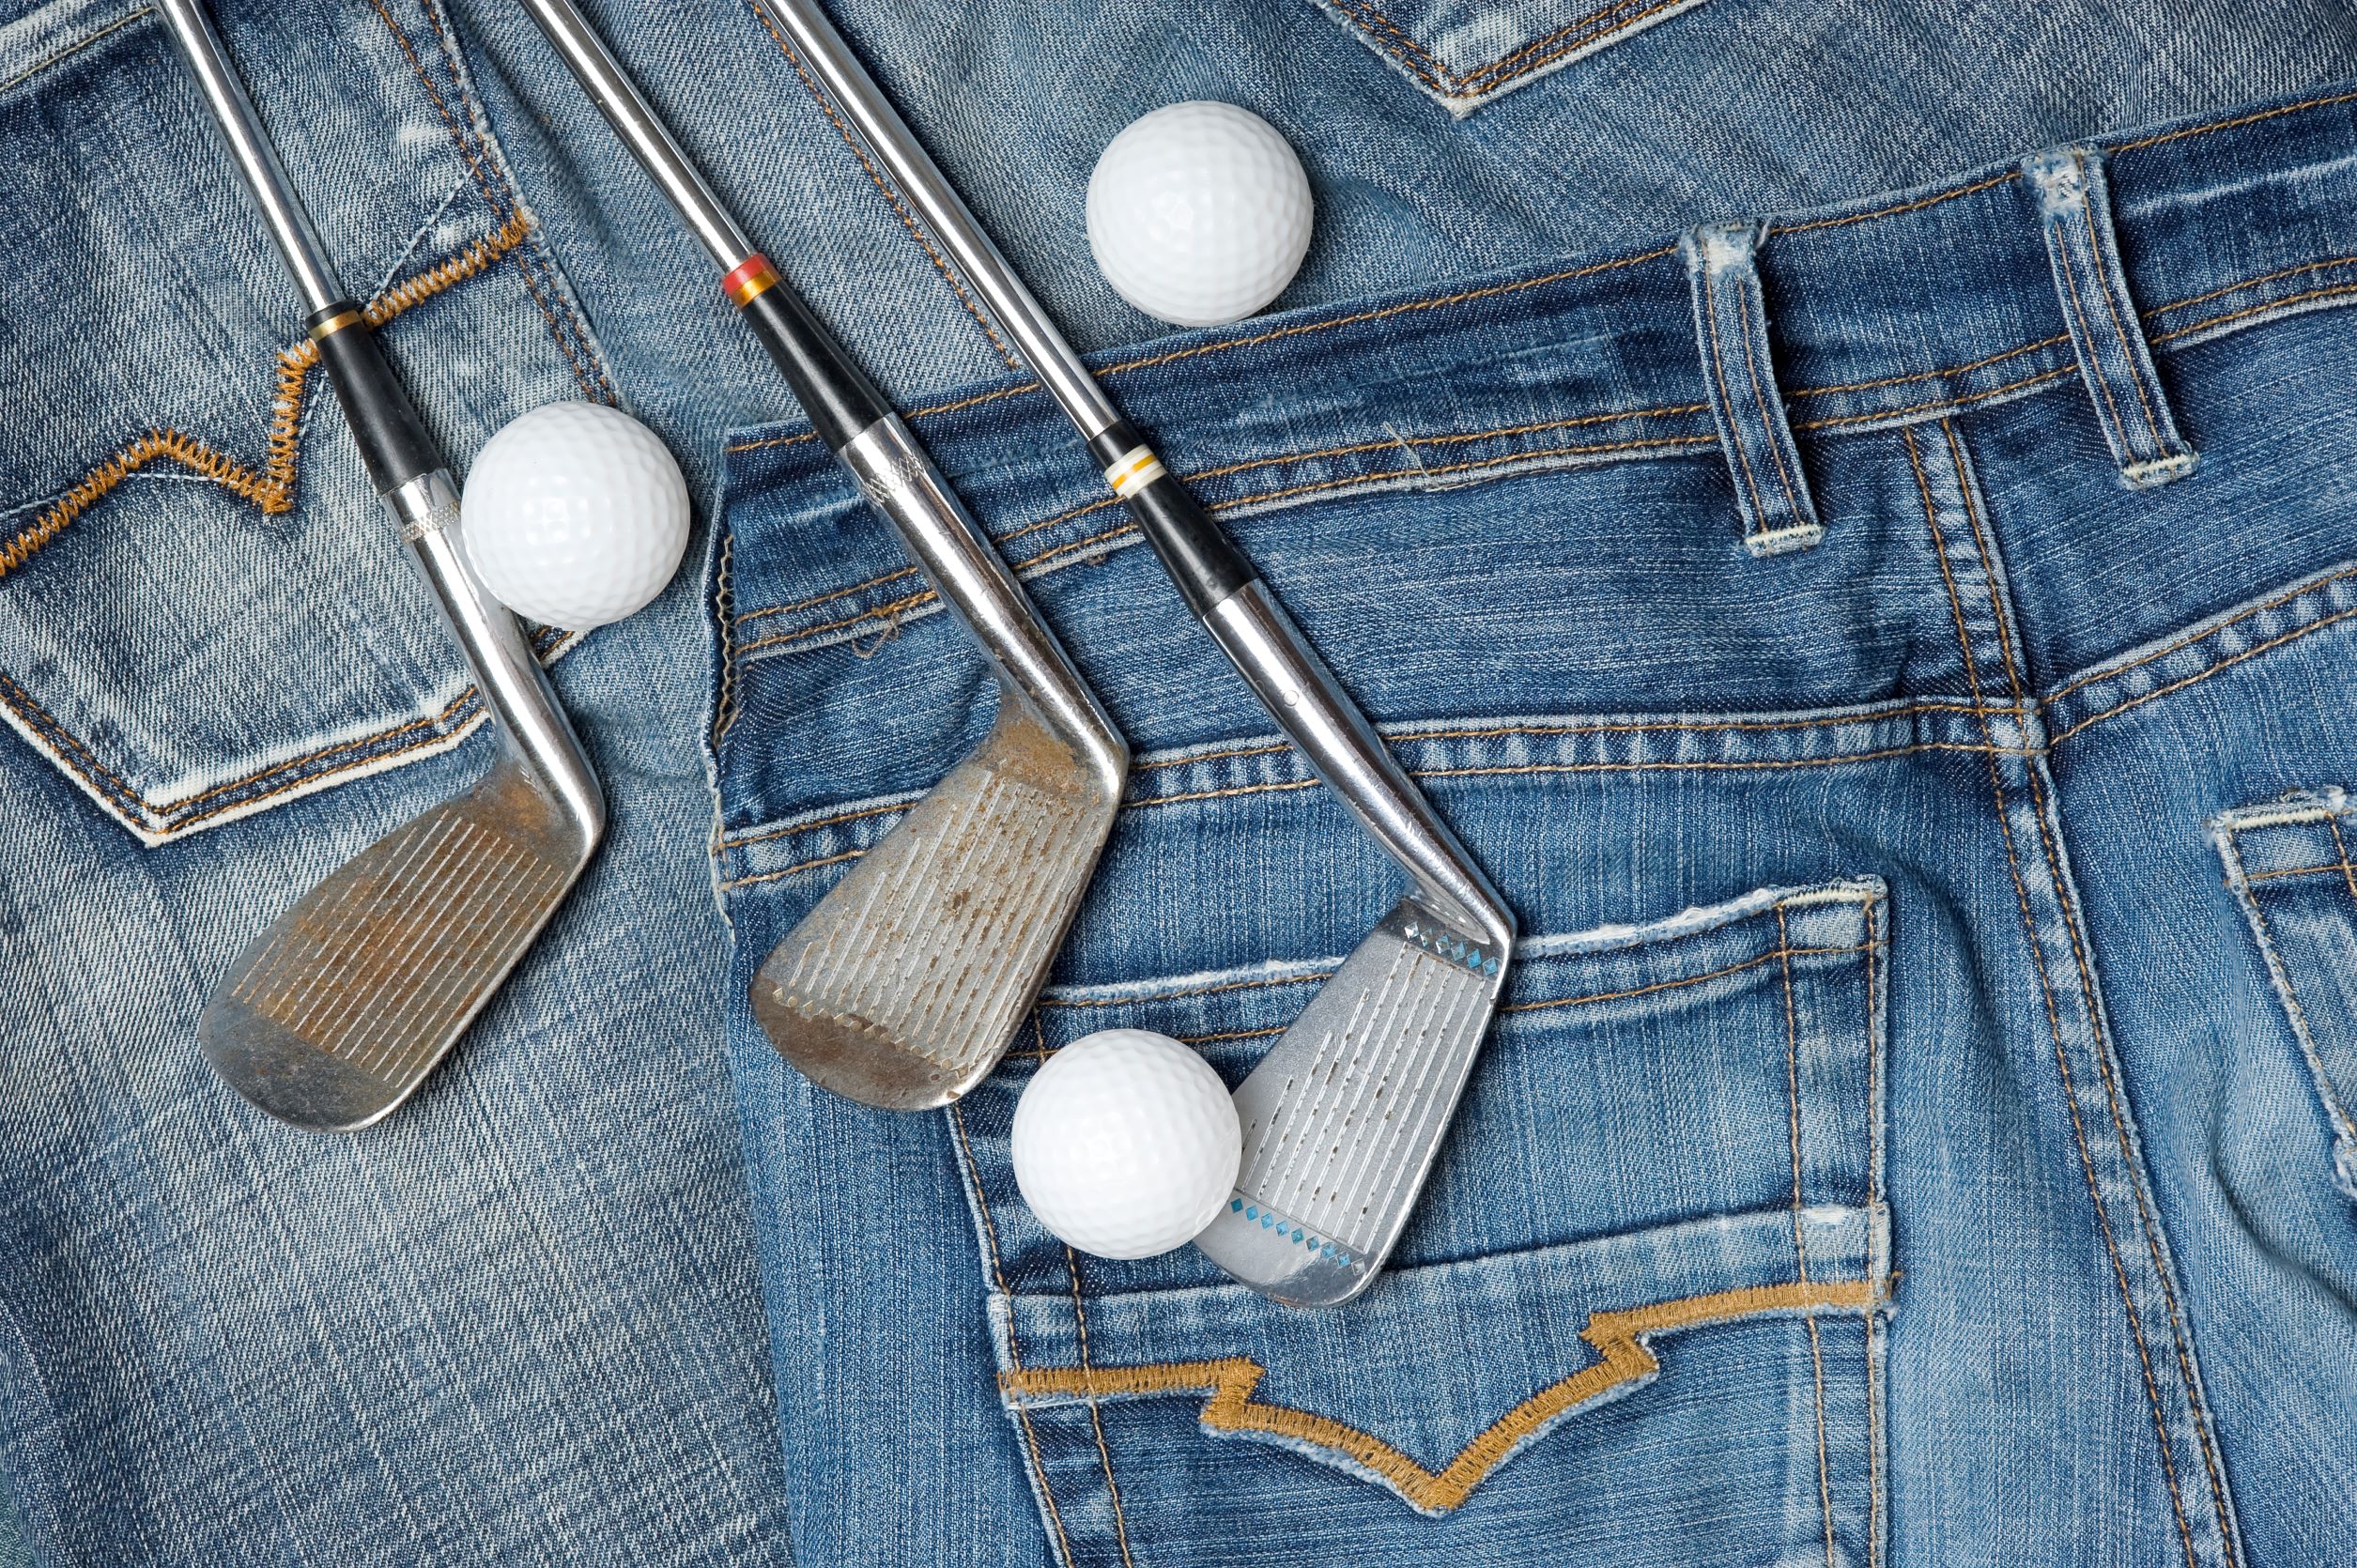 Jeans with golf clubs laying on top